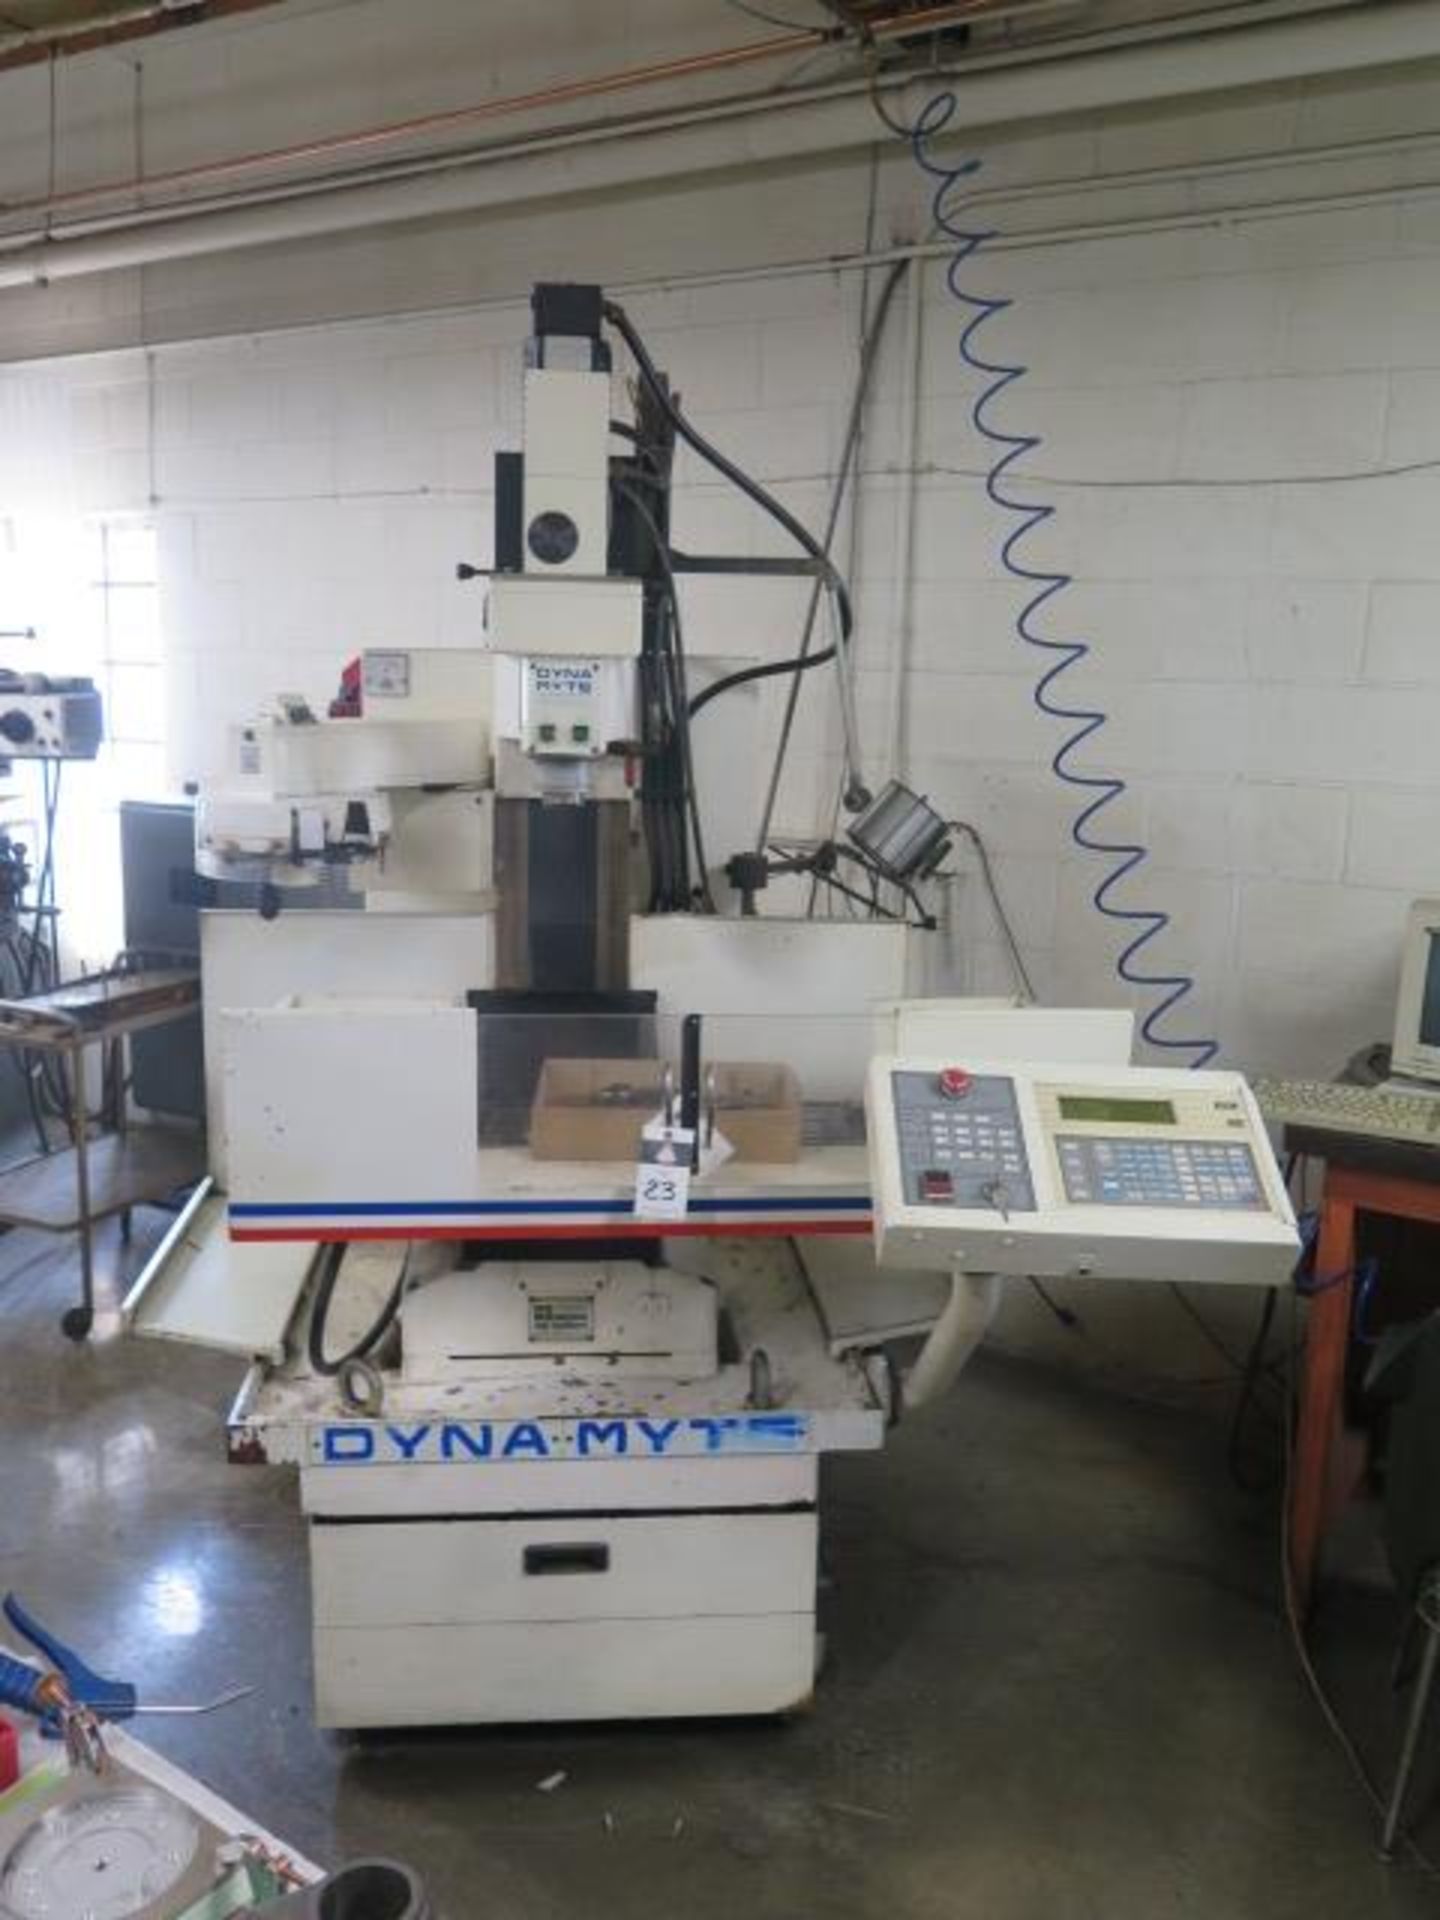 Dyna Myte 4400 CNC VMC w/ Dyna 44M Controls, 10-Station ATC, CAT-30 Taper, SOLD AS IS